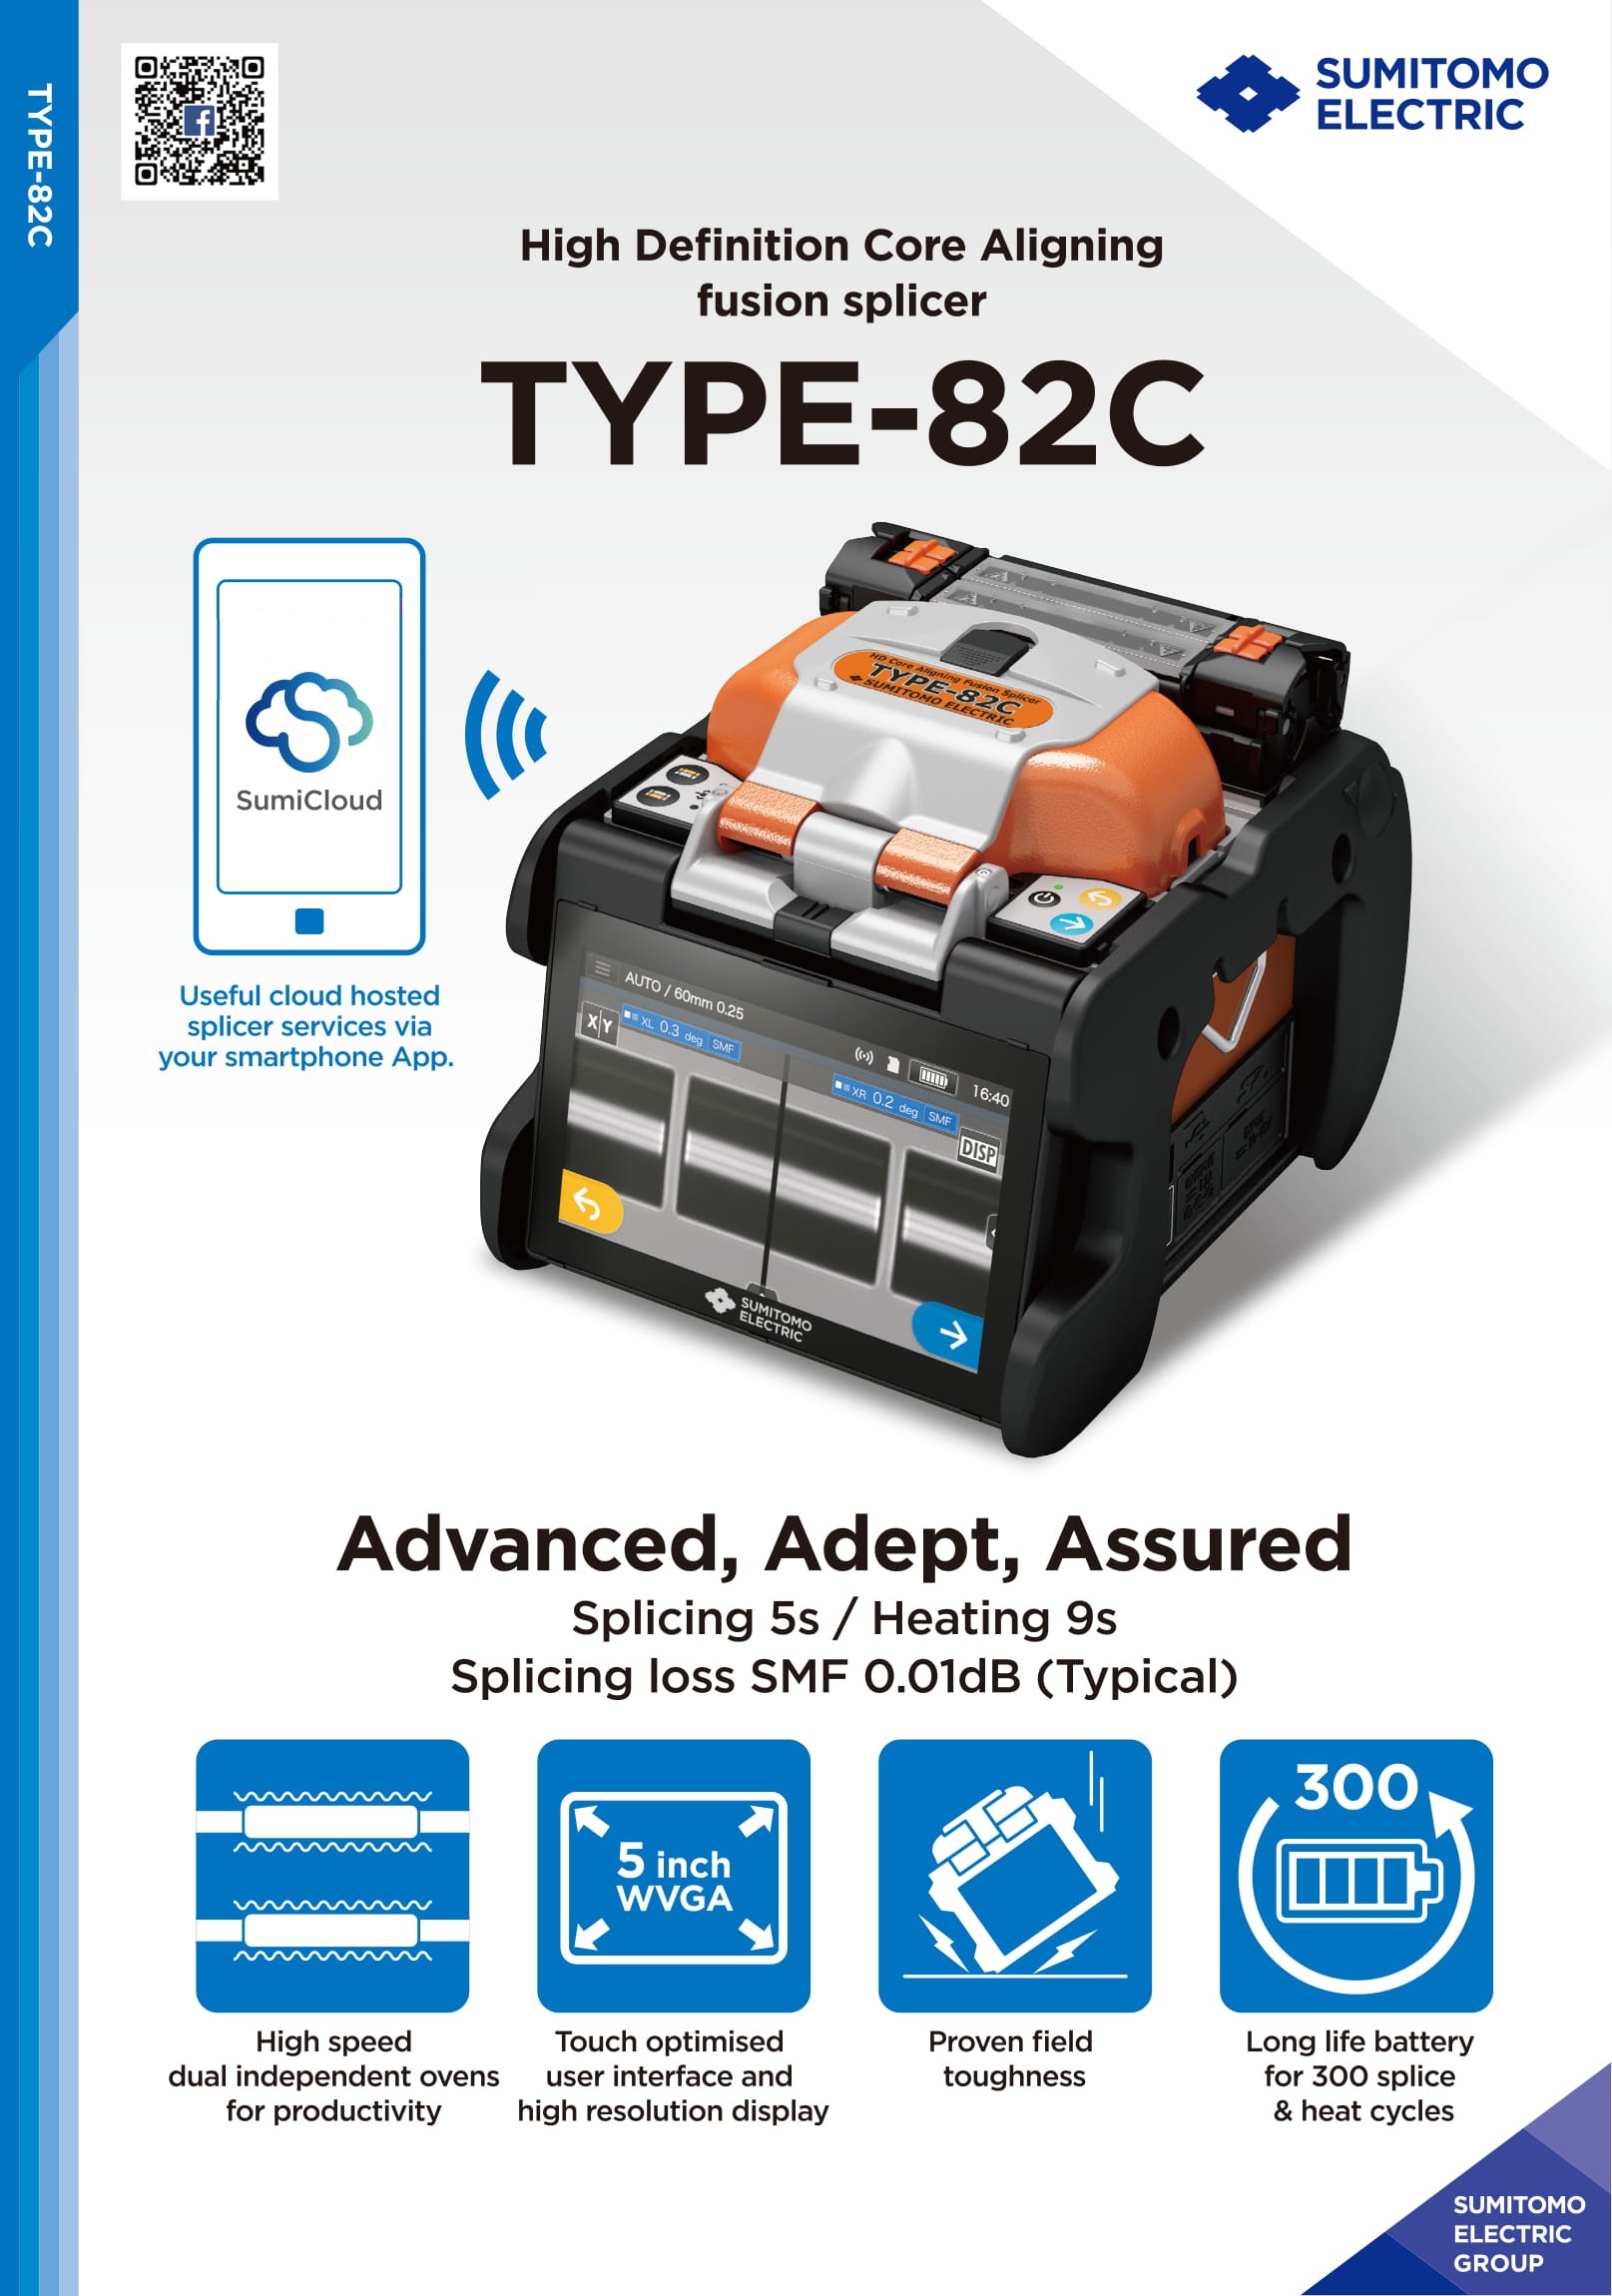 Get the Core Alignment Fusion Splicer in Delhi, IndiaElectronics and AppliancesTelevisionsNorth DelhiKingsway Camp